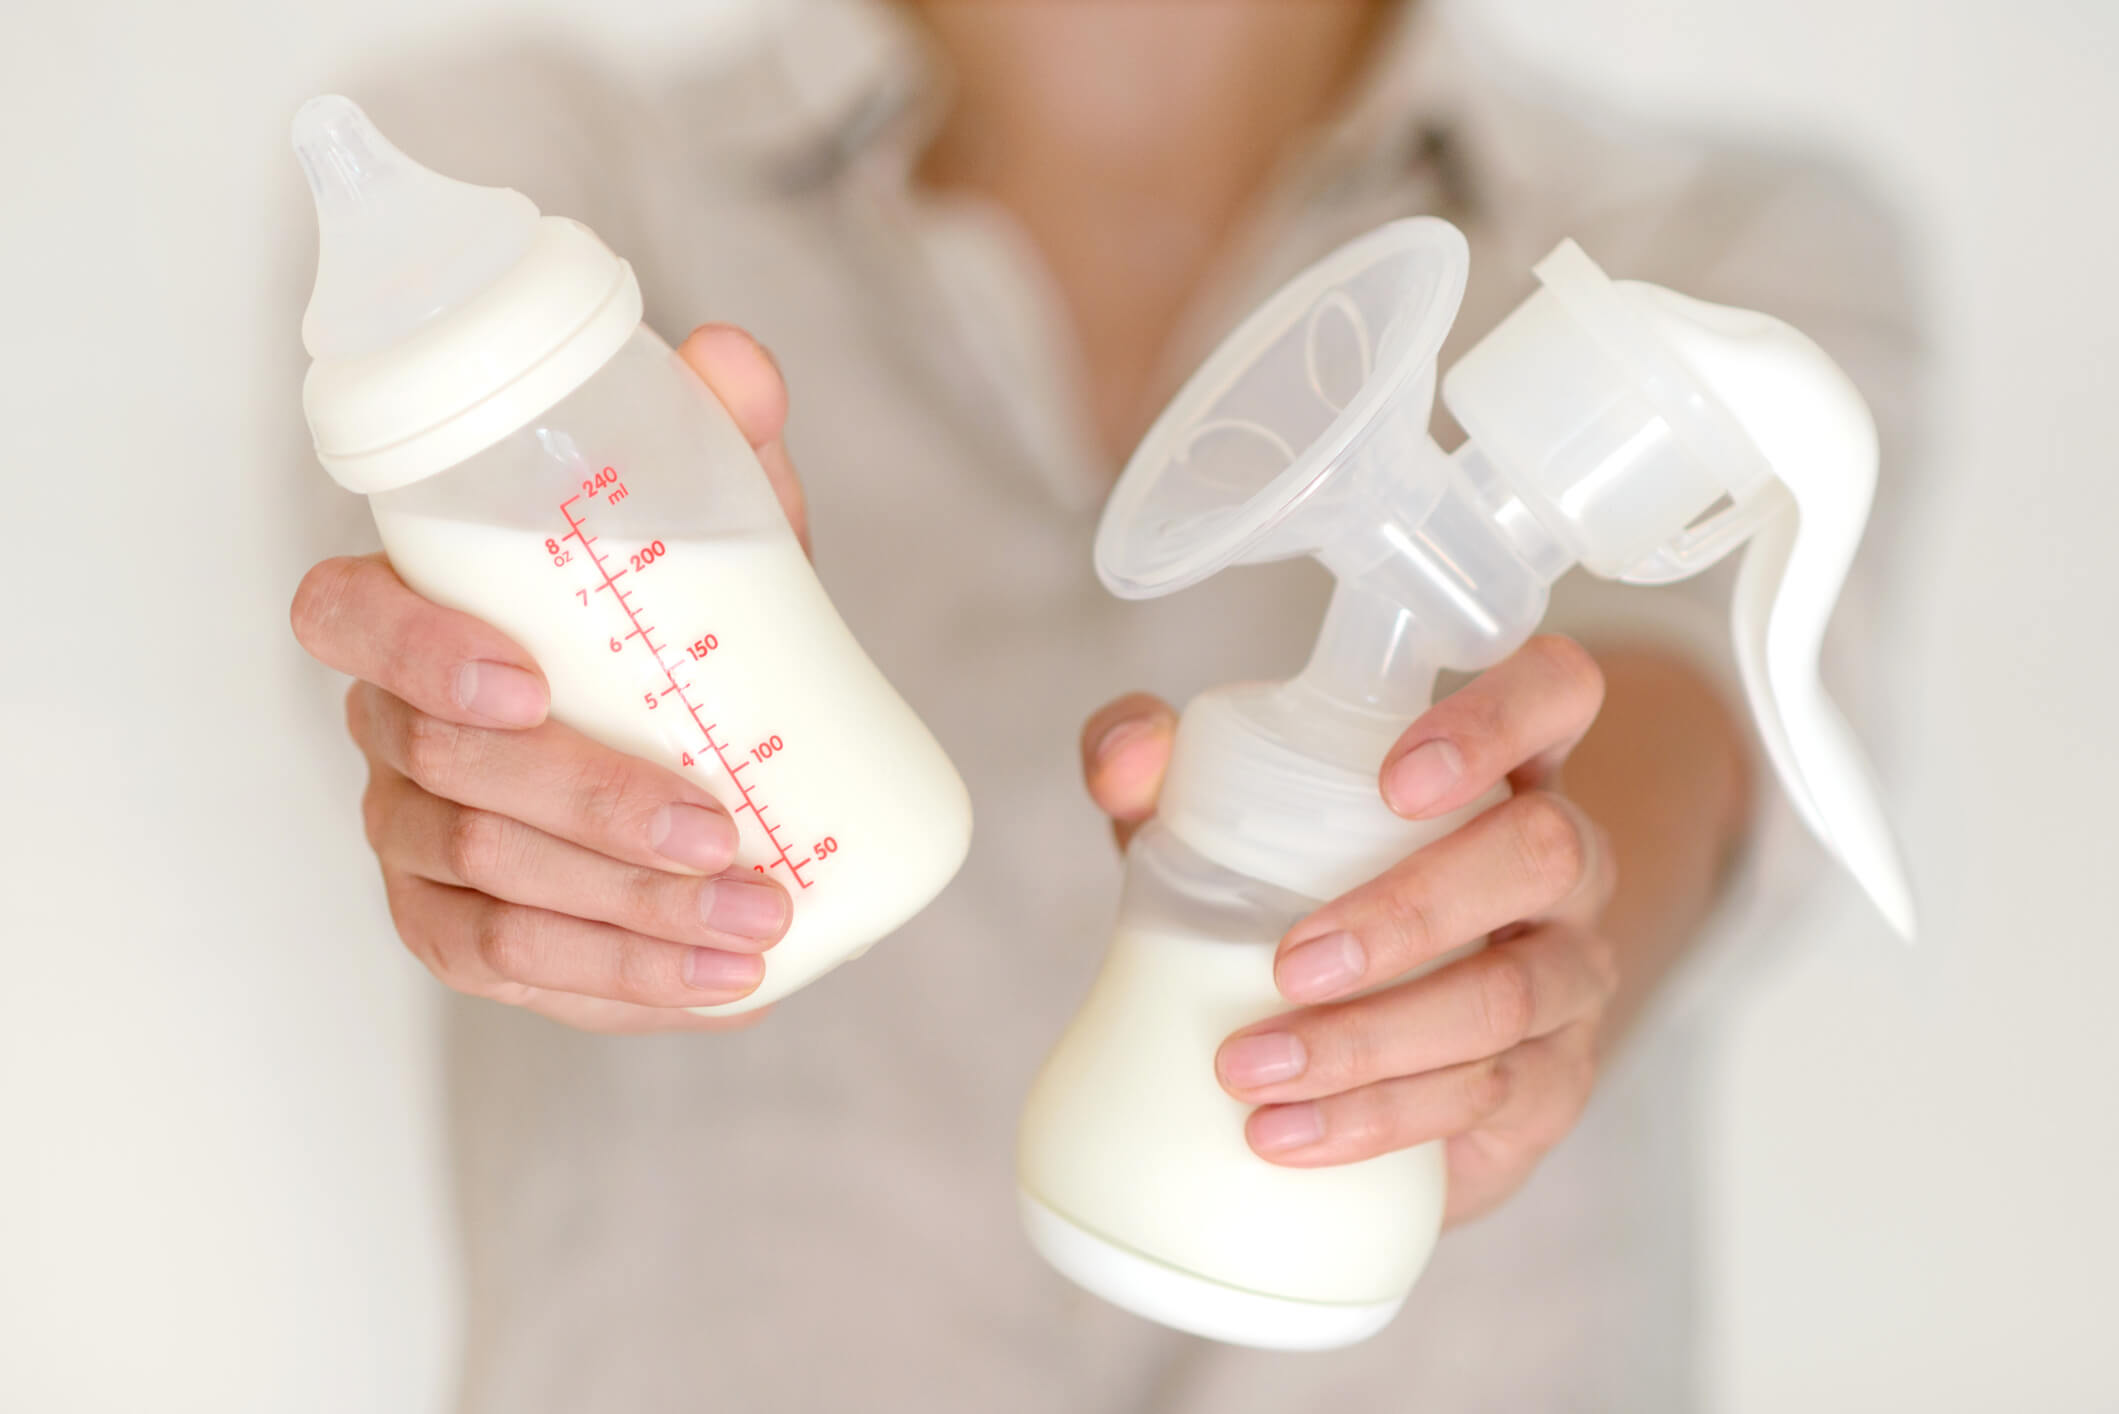 Breast pump and bottle with milk in woman’s hand